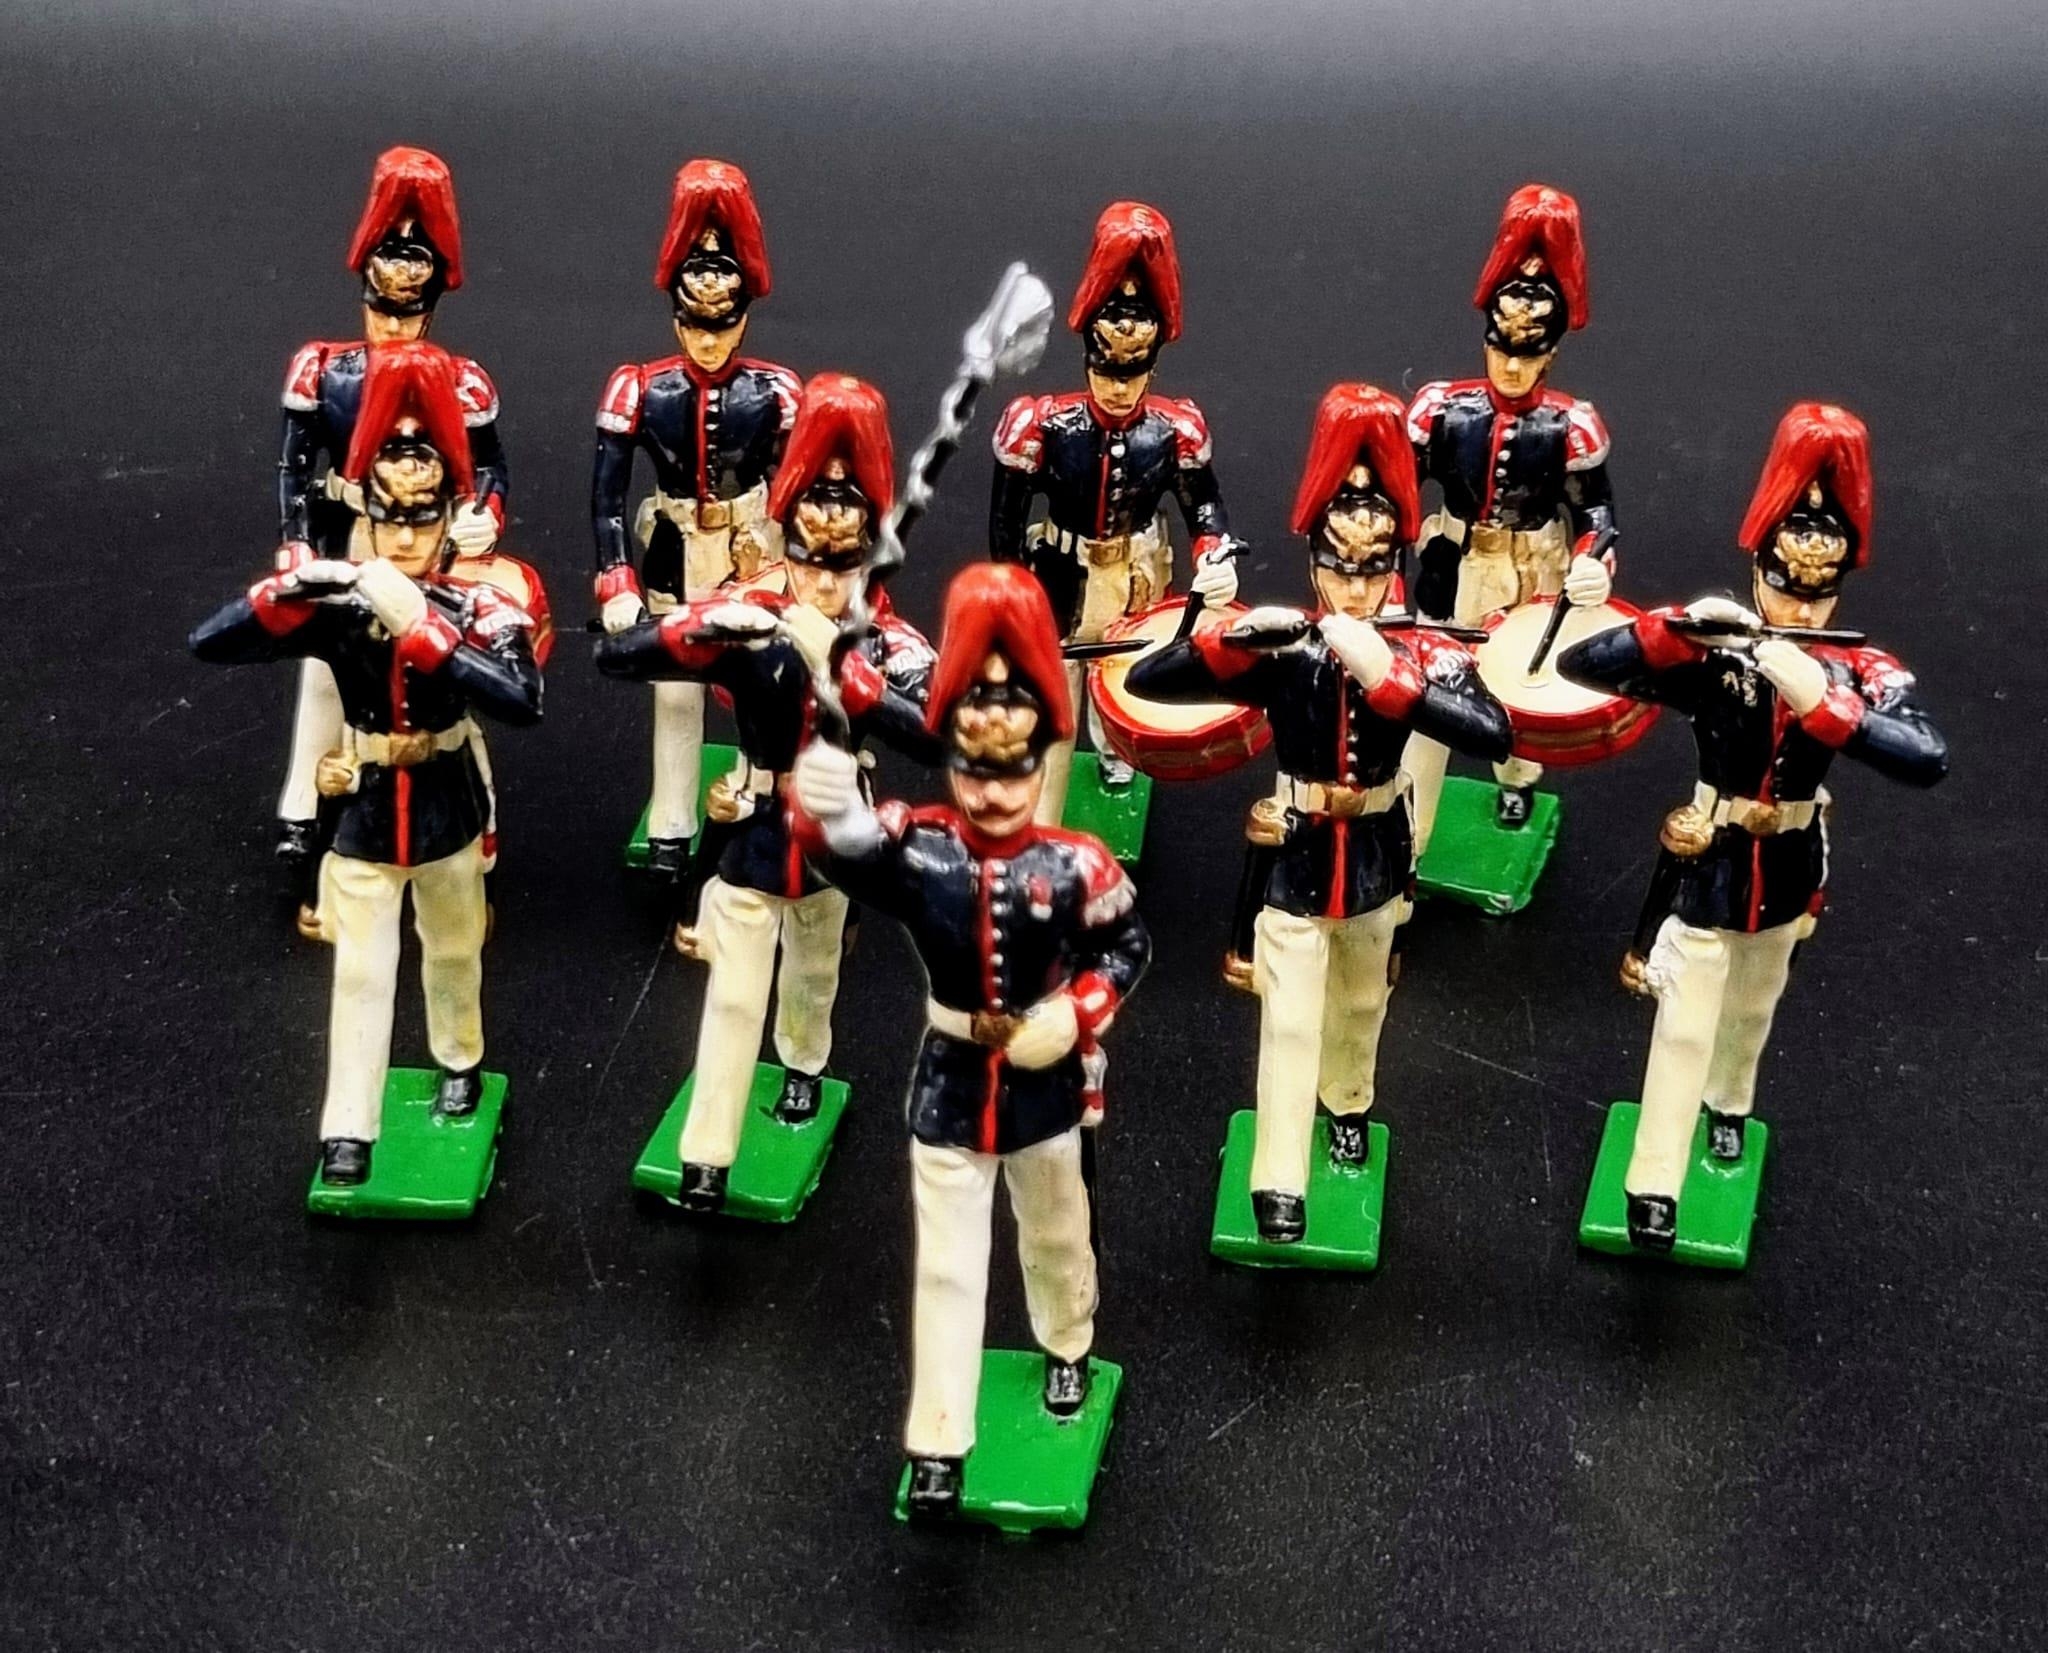 A Vintage Set of Nine Prussian Fife and Drums Lead Soldiers.